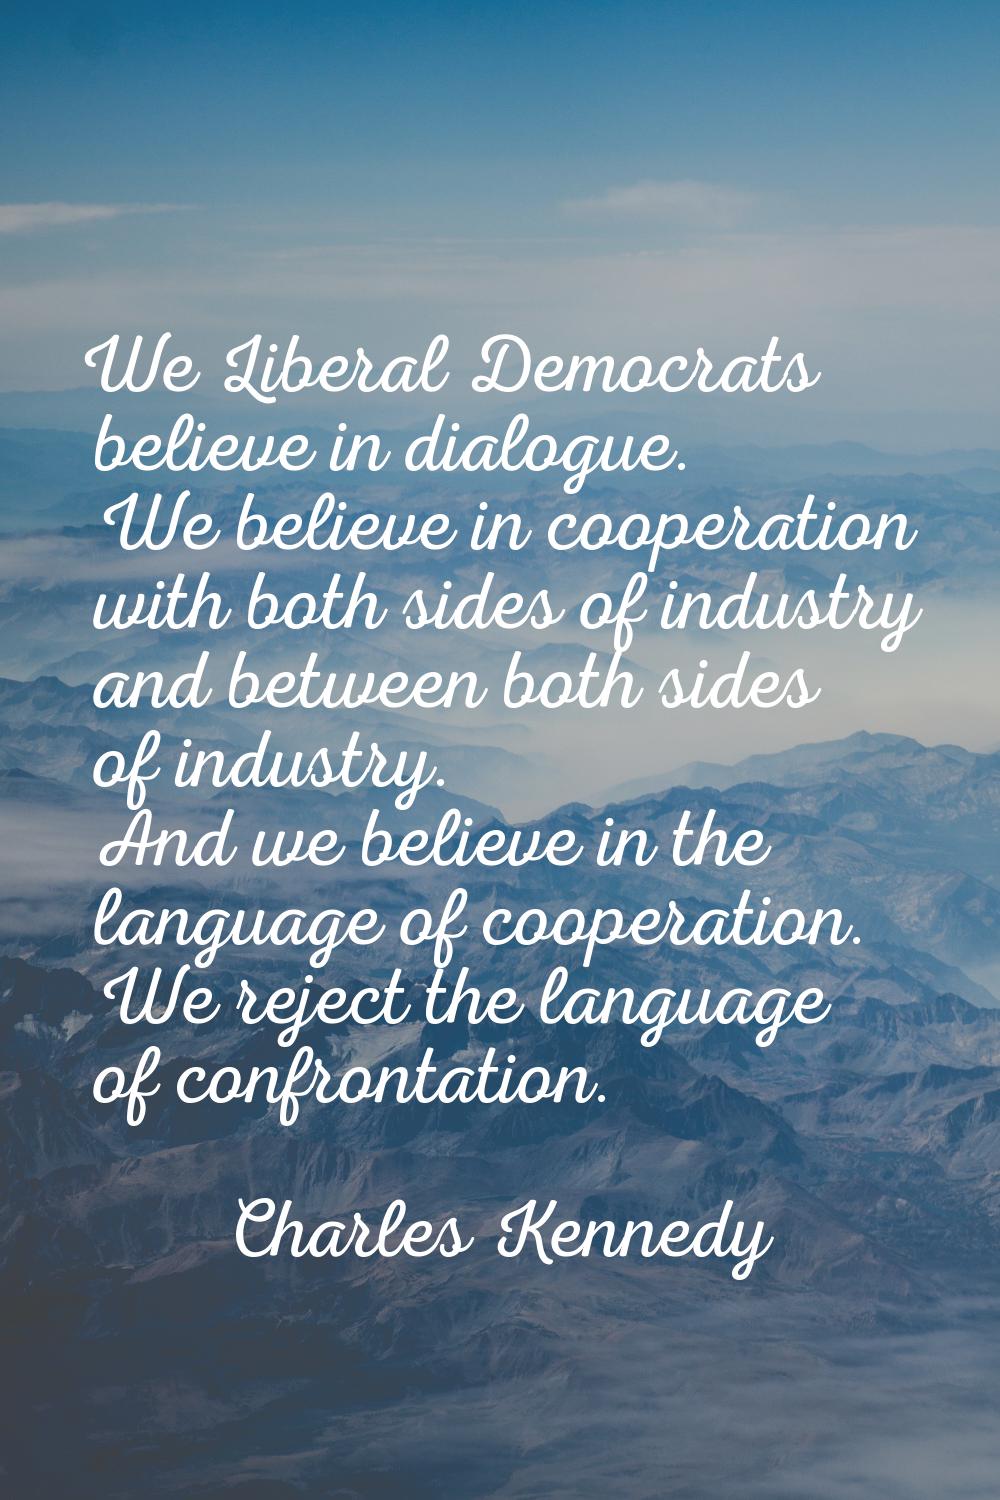 We Liberal Democrats believe in dialogue. We believe in cooperation with both sides of industry and